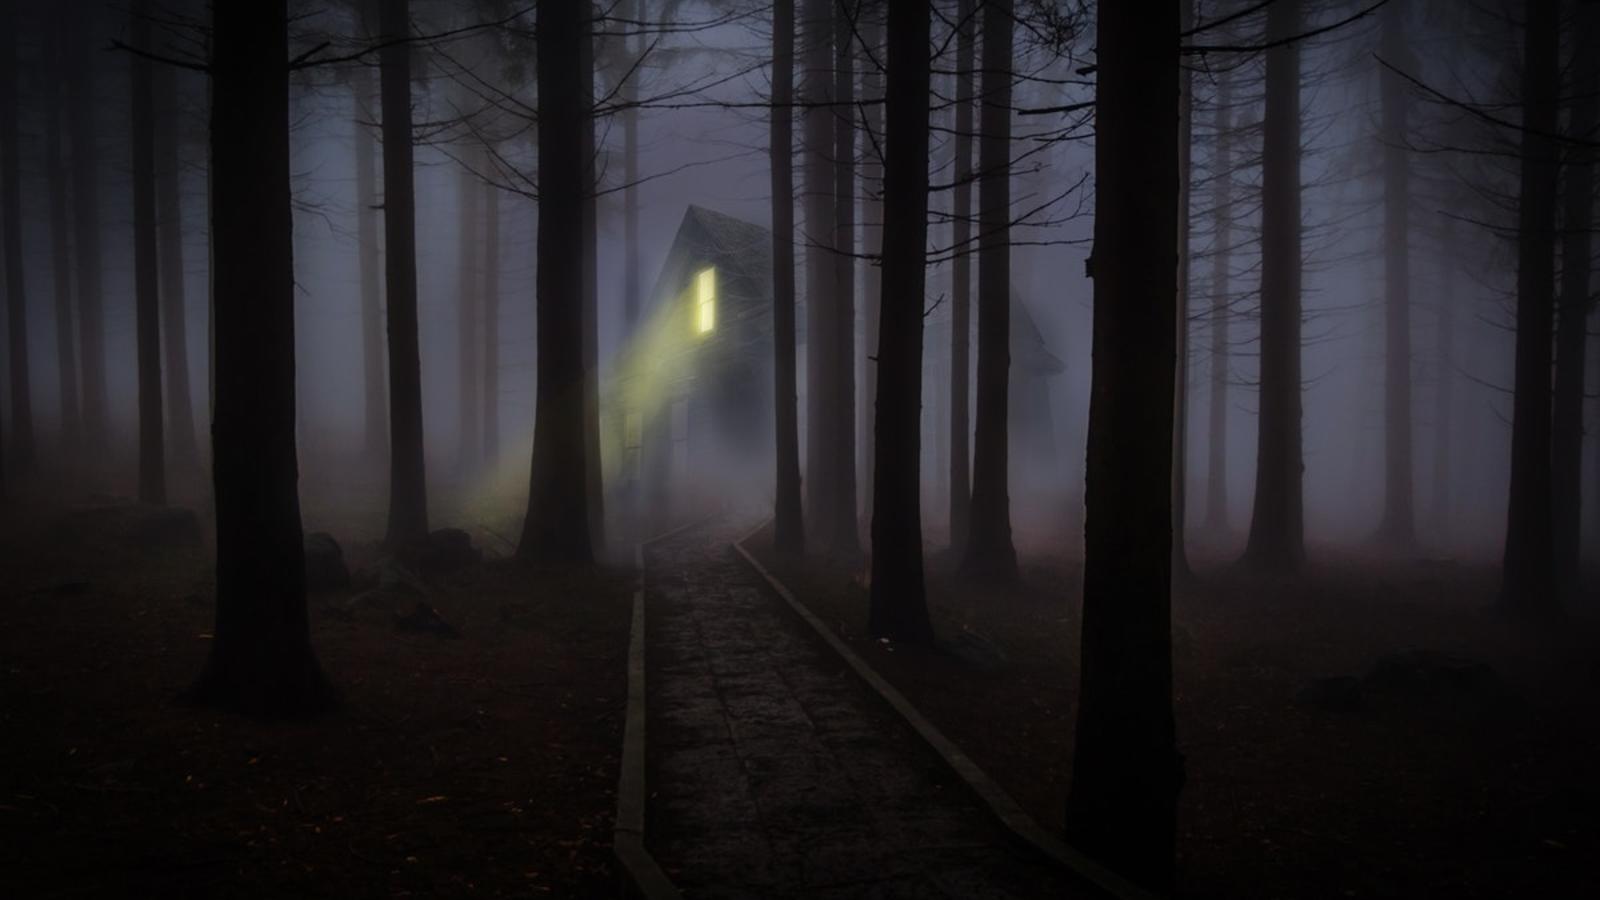 Why Do We Tell Ghost Stories? Ghost History in American Culture